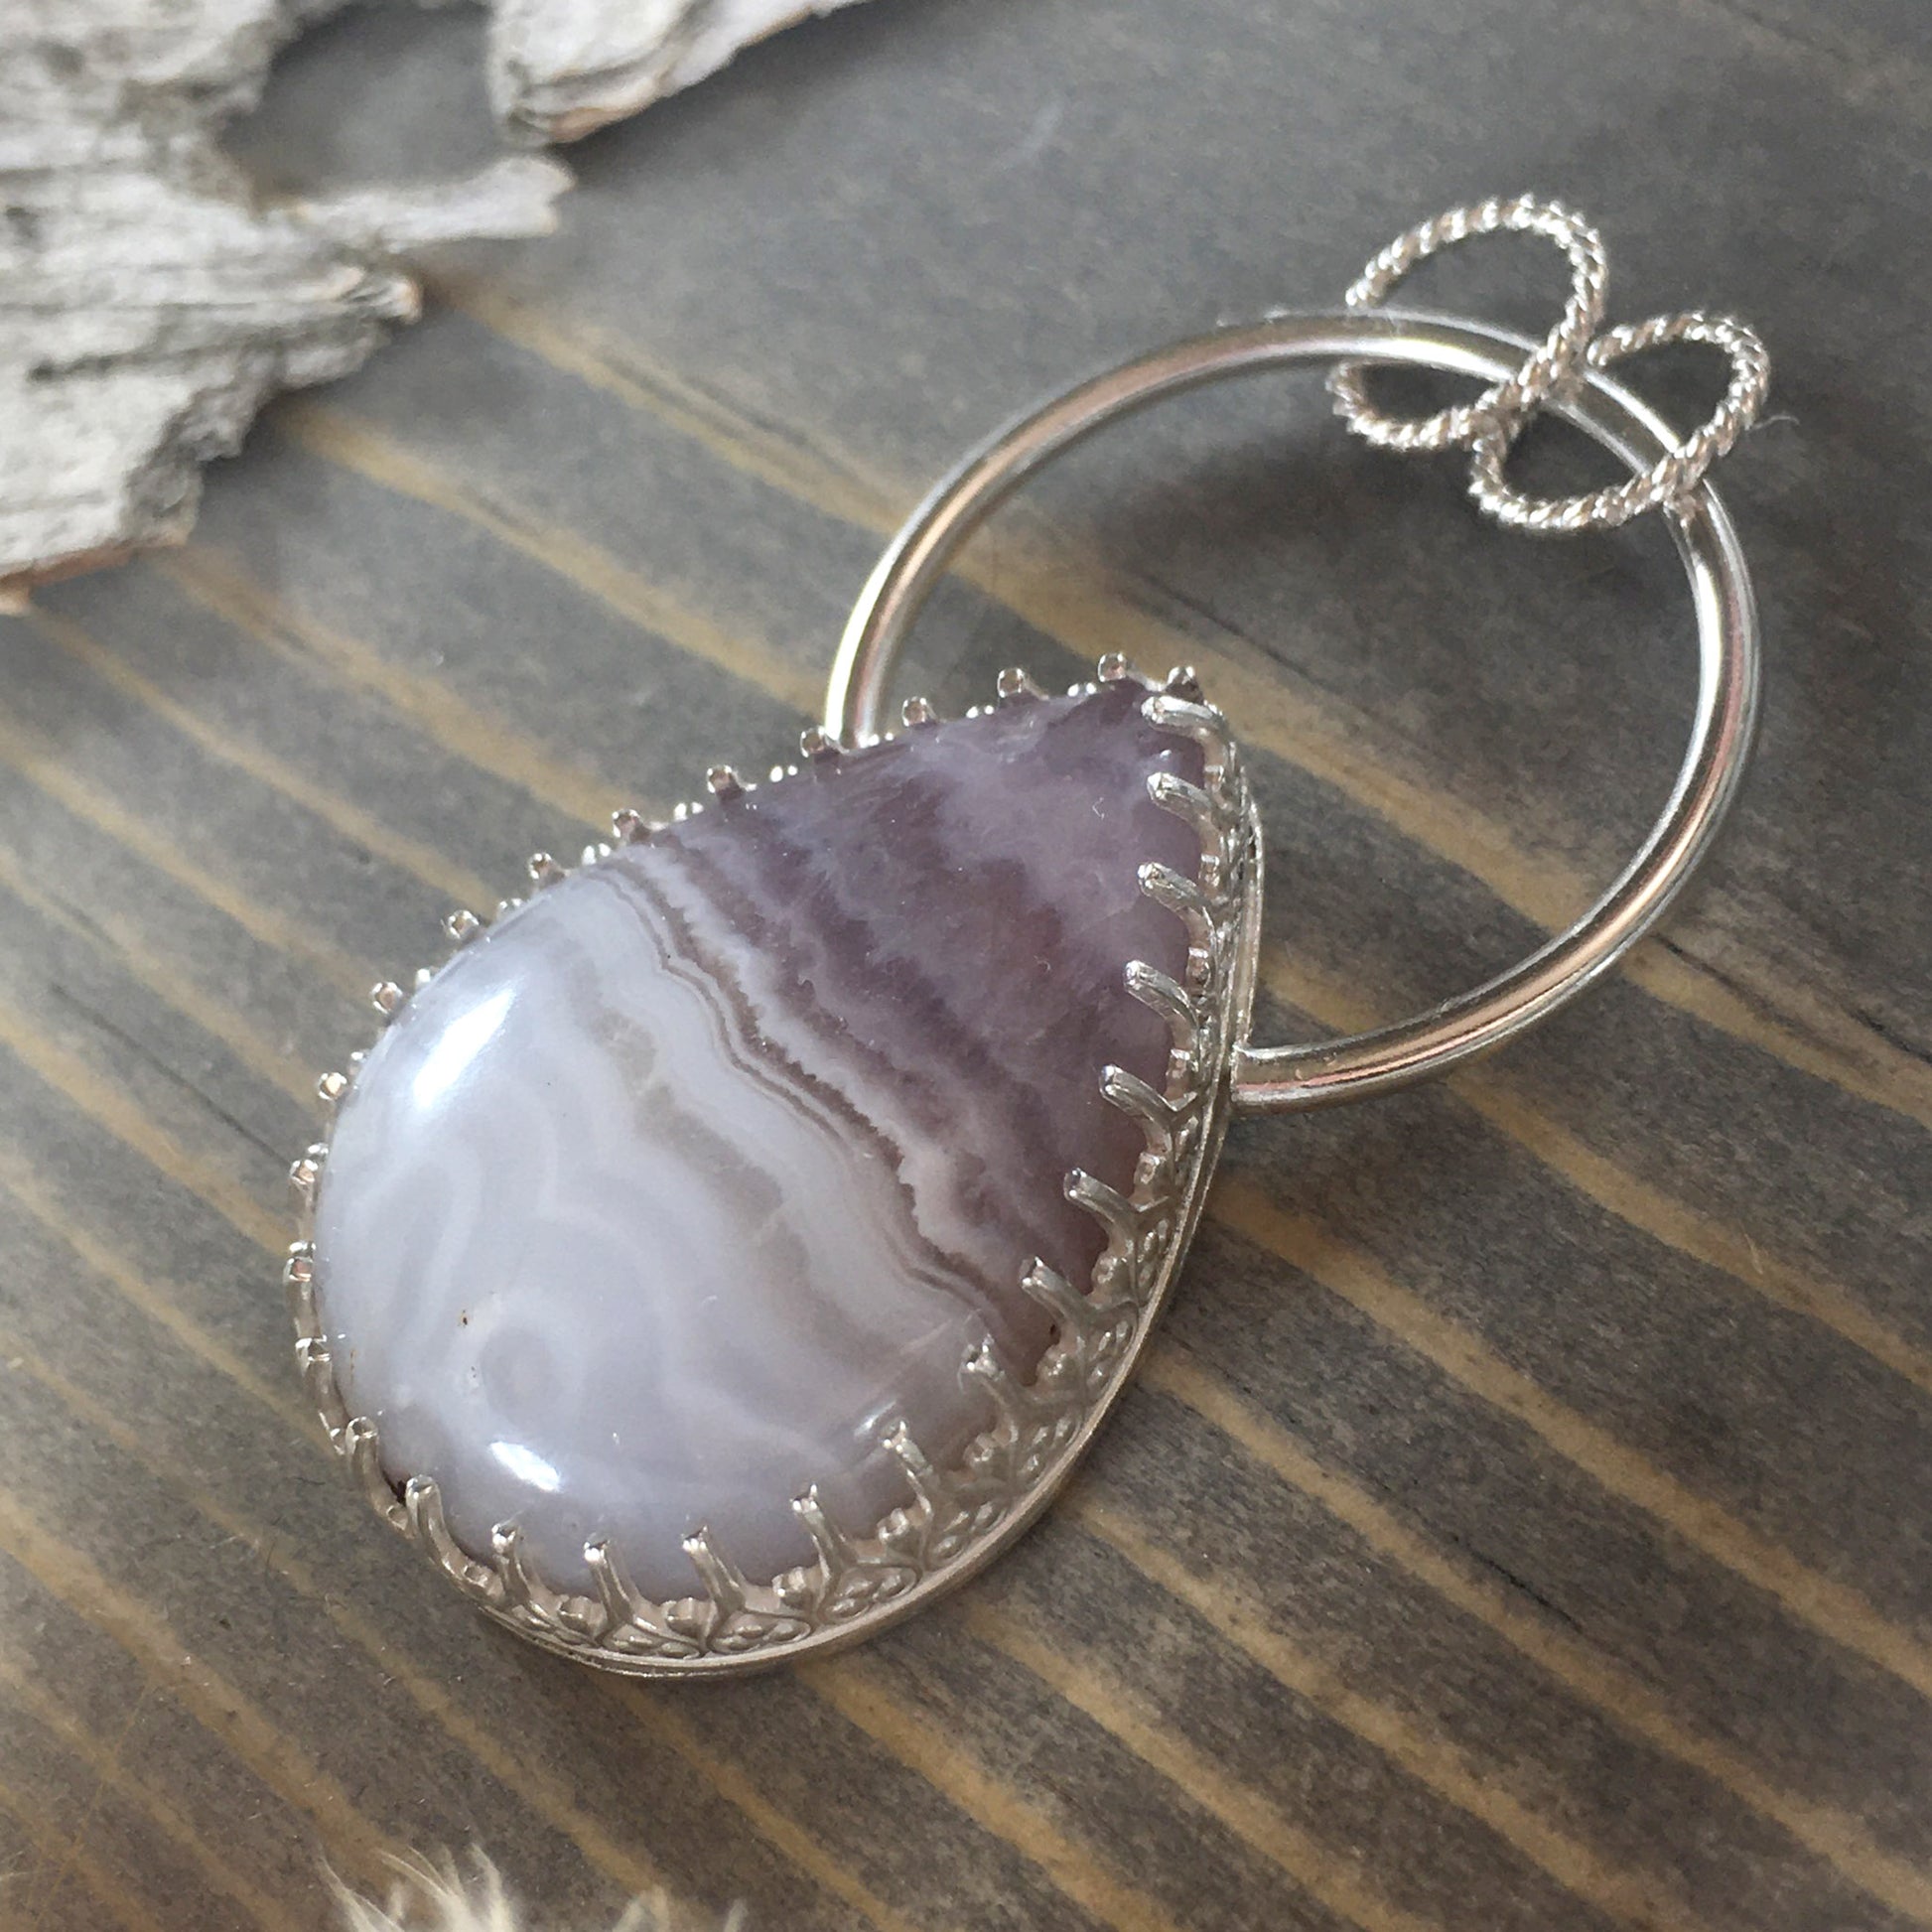 Amethyst Lace Pendant Front View - Stone Treasures by the Lake